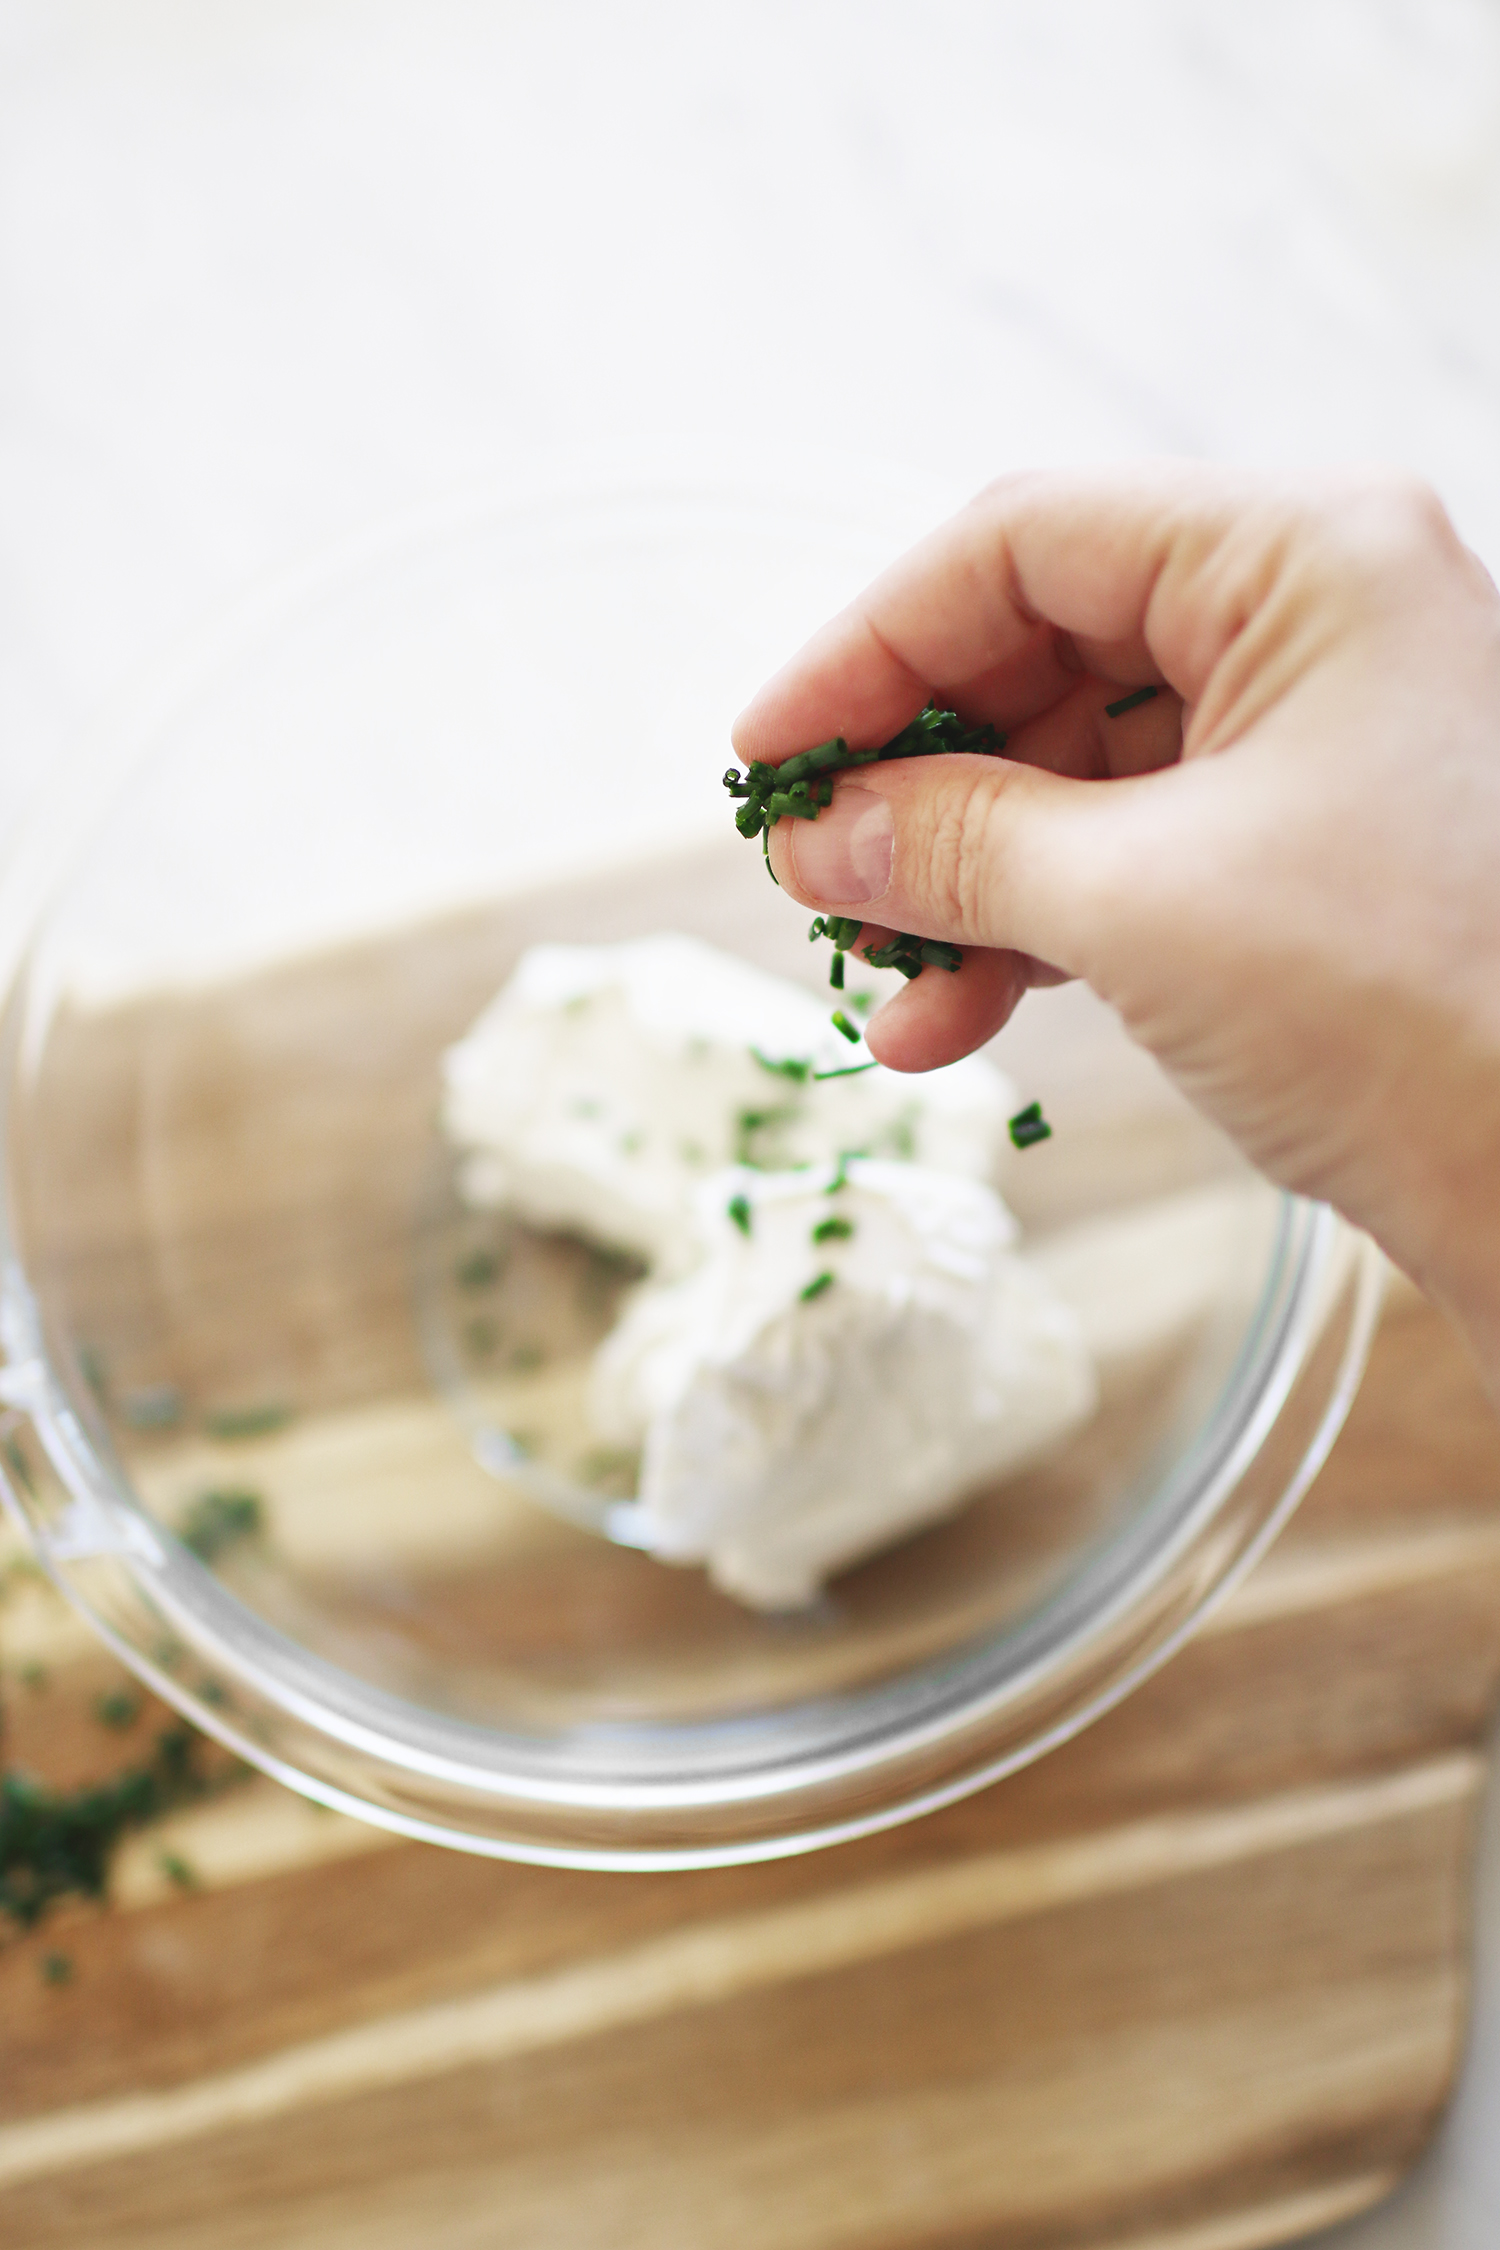 Goat Cheese and Herb Spread Appetizer. The perfect touch to entertaining guests this holiday season and one that will be a crowd pleaser! Catch the entire recipe and how-to over at Haus of Layne #EasyAppetizers #AppetizerRecipe #HolidayRecipes #EasyHolidayRecipes #HolidayAppetizerRecipe